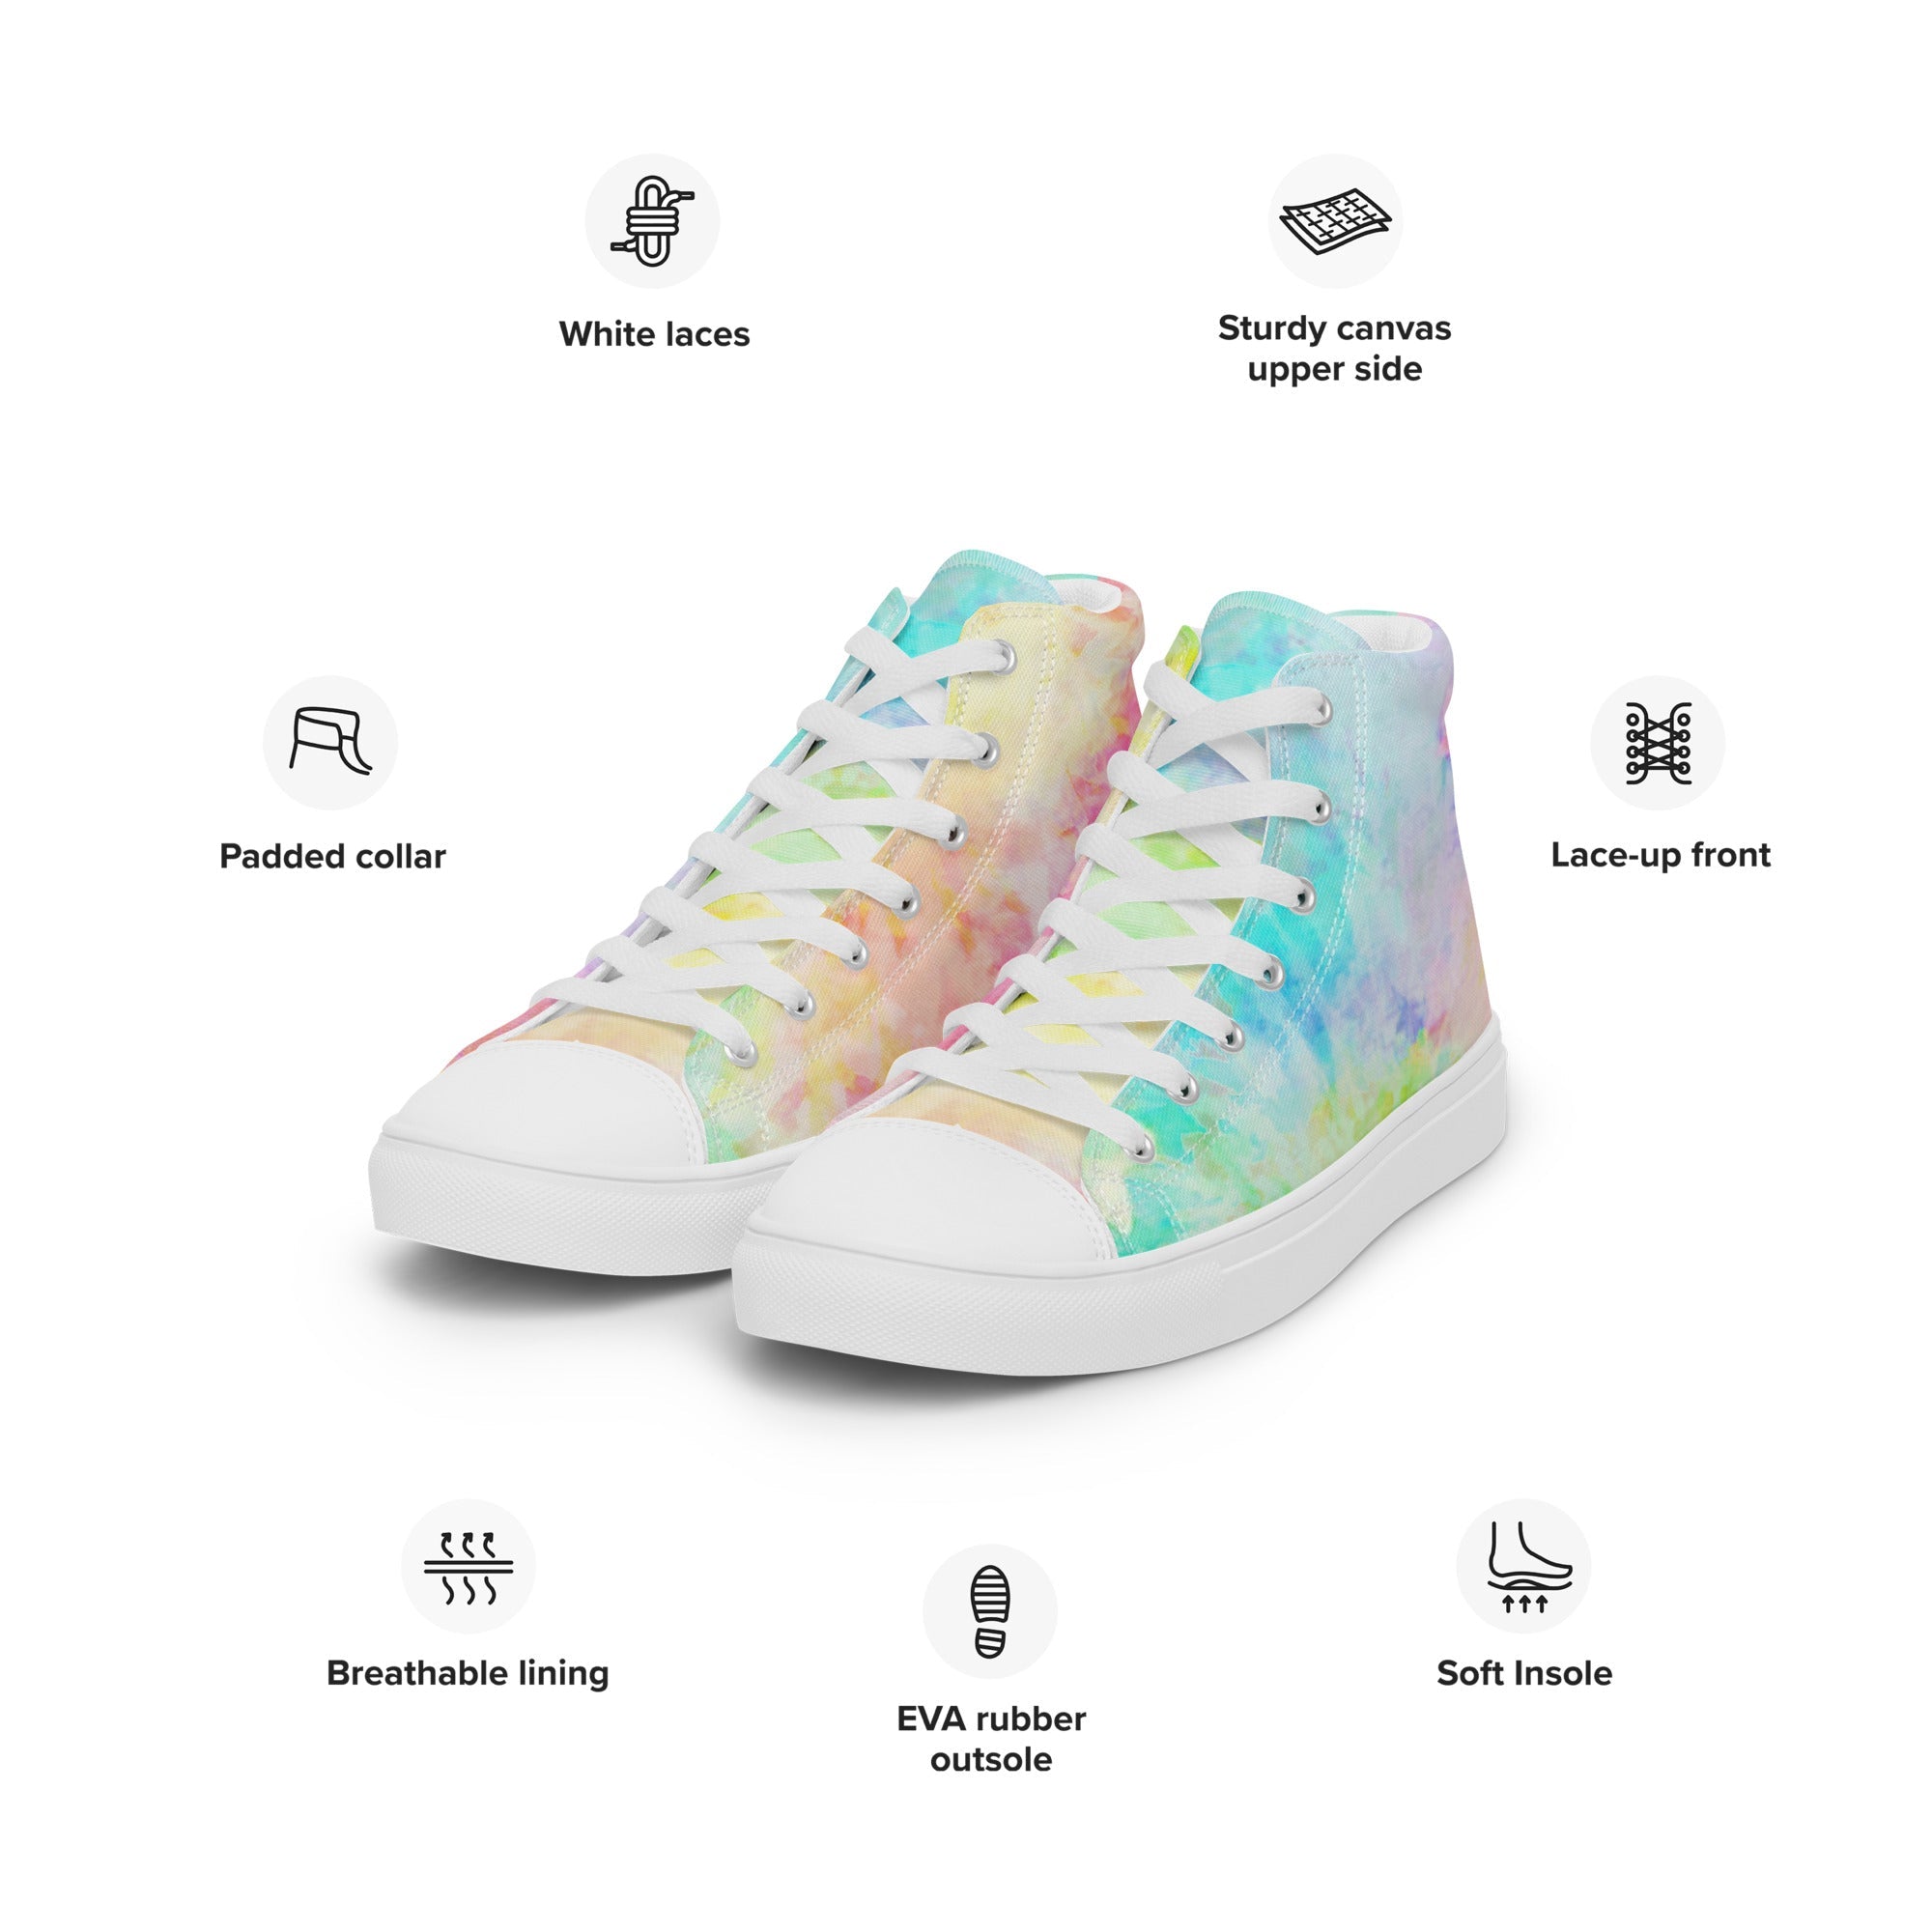 Tie-Dye Womens high top canvas shoes